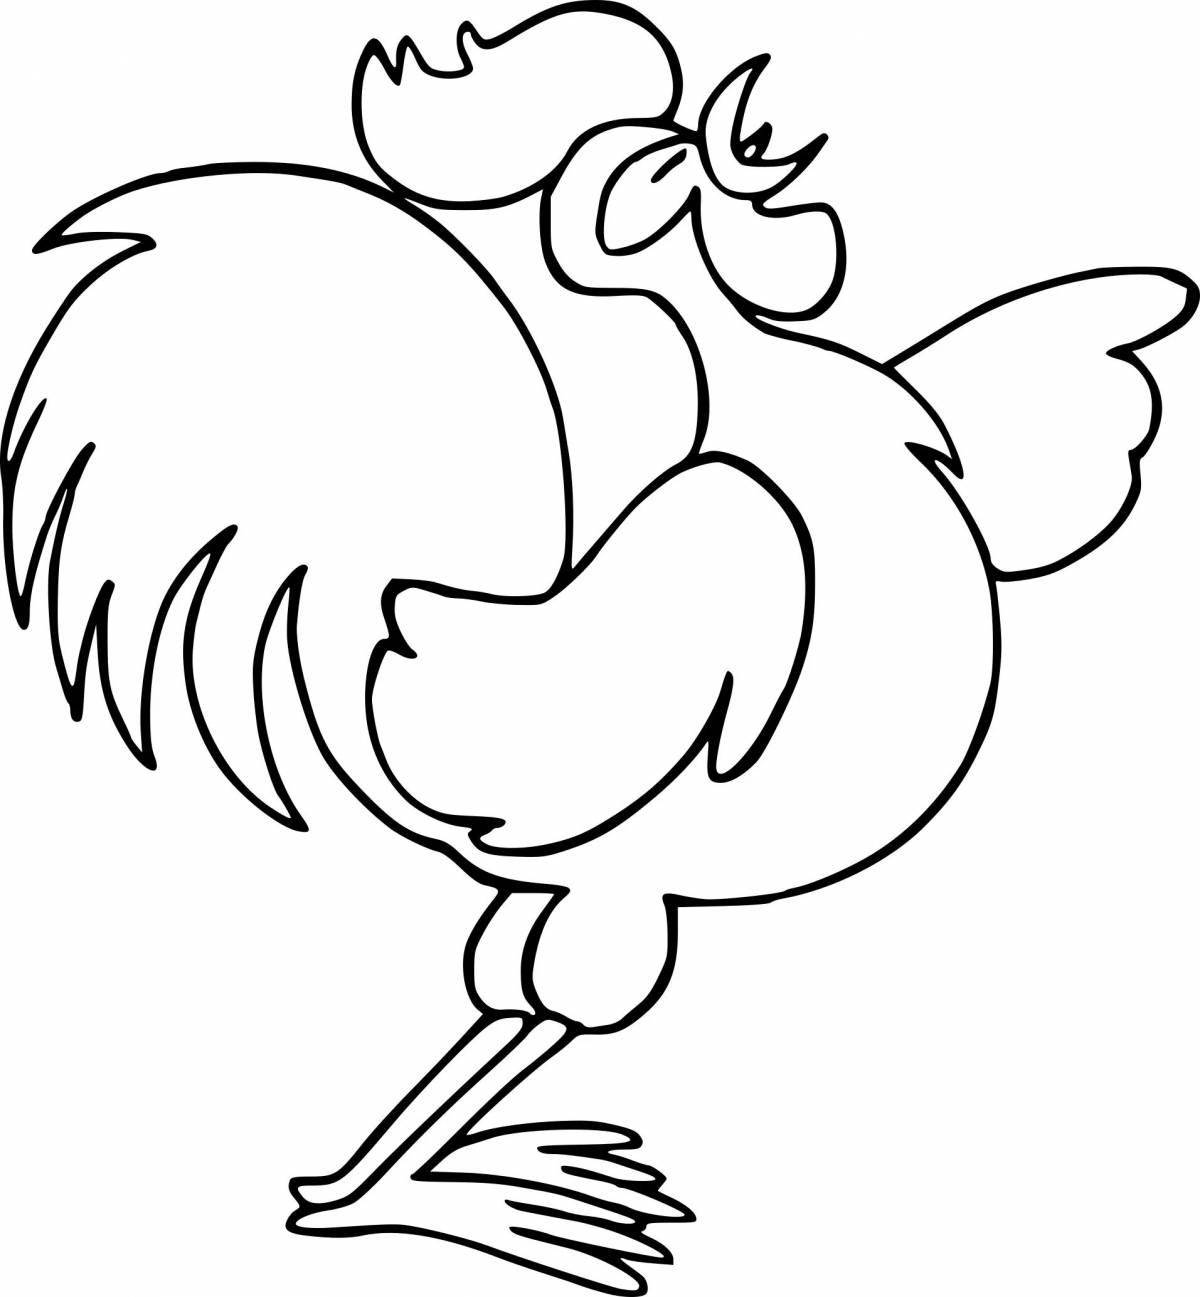 Luminous rooster coloring page